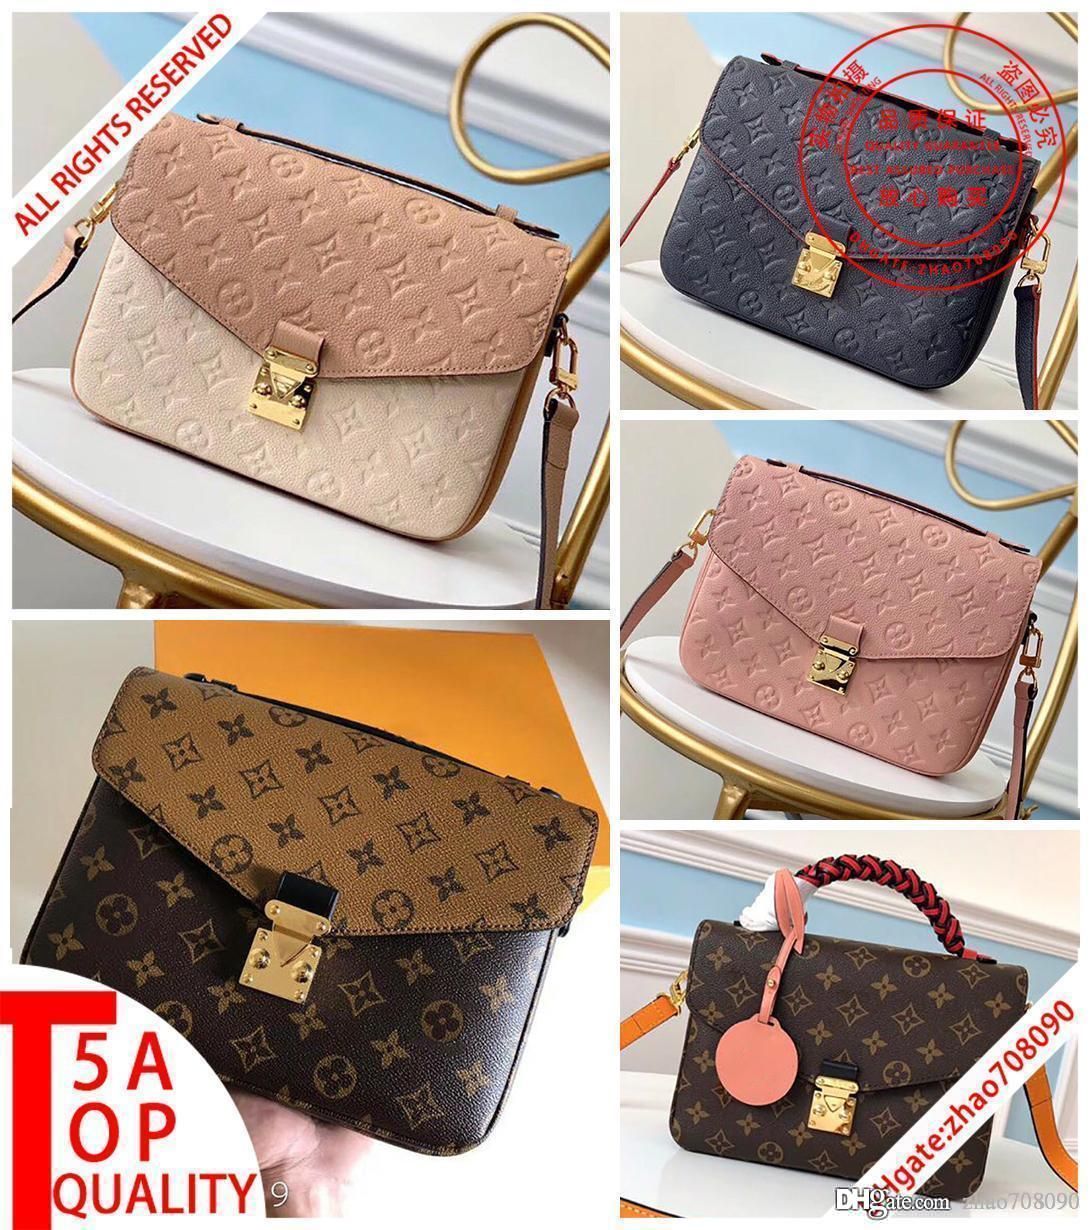 2020 Hot Style Designer Bags 5A Top Quality Pochette Metis Messenger Bags M44876 Real Leather ...